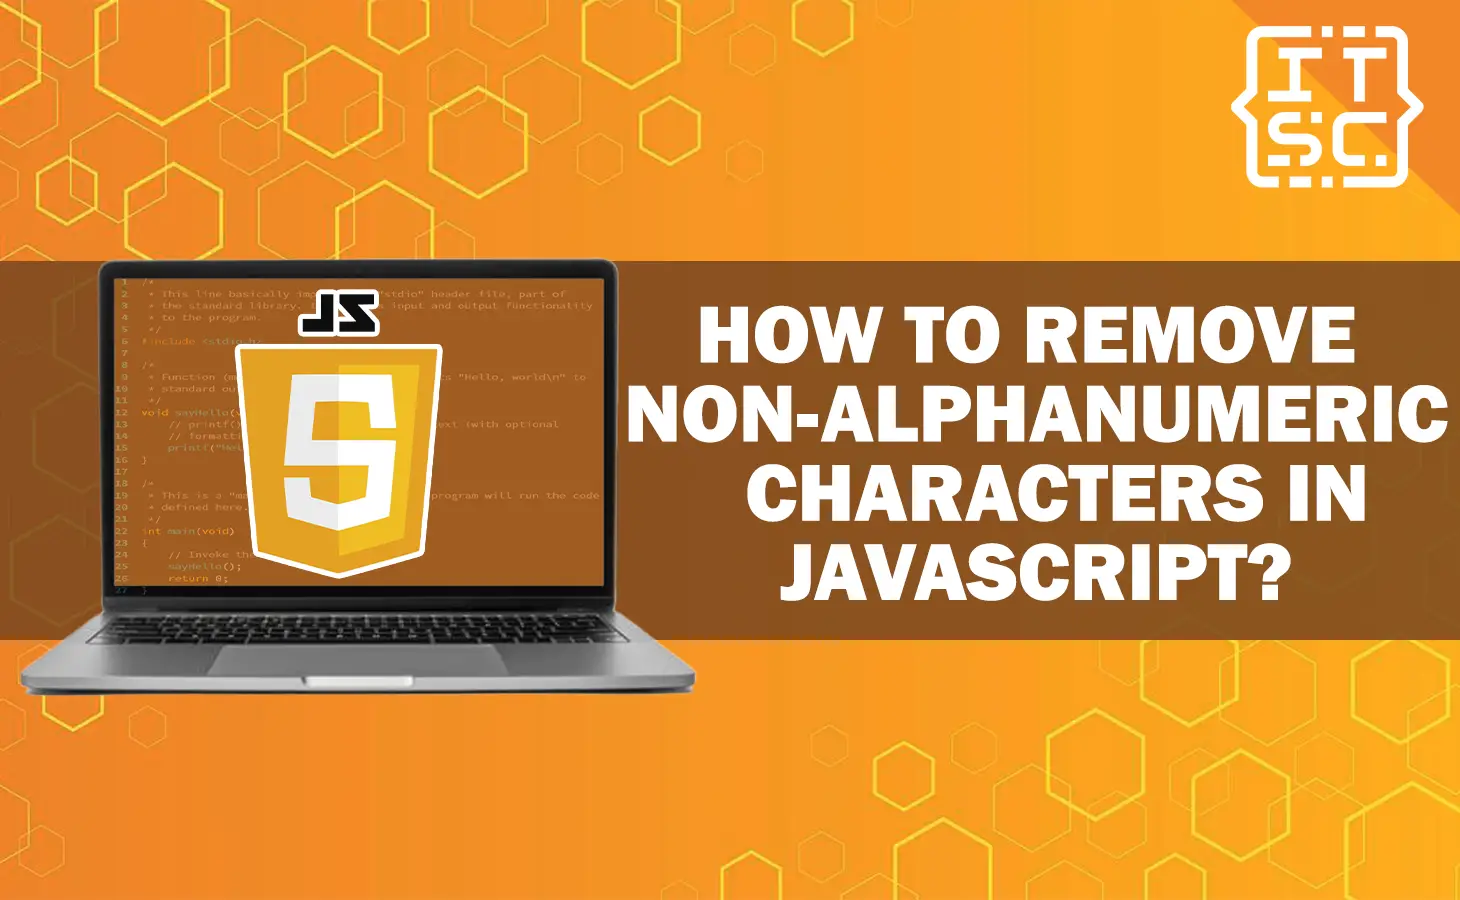 How to remove all non-alphanumeric characters in JavaScript?